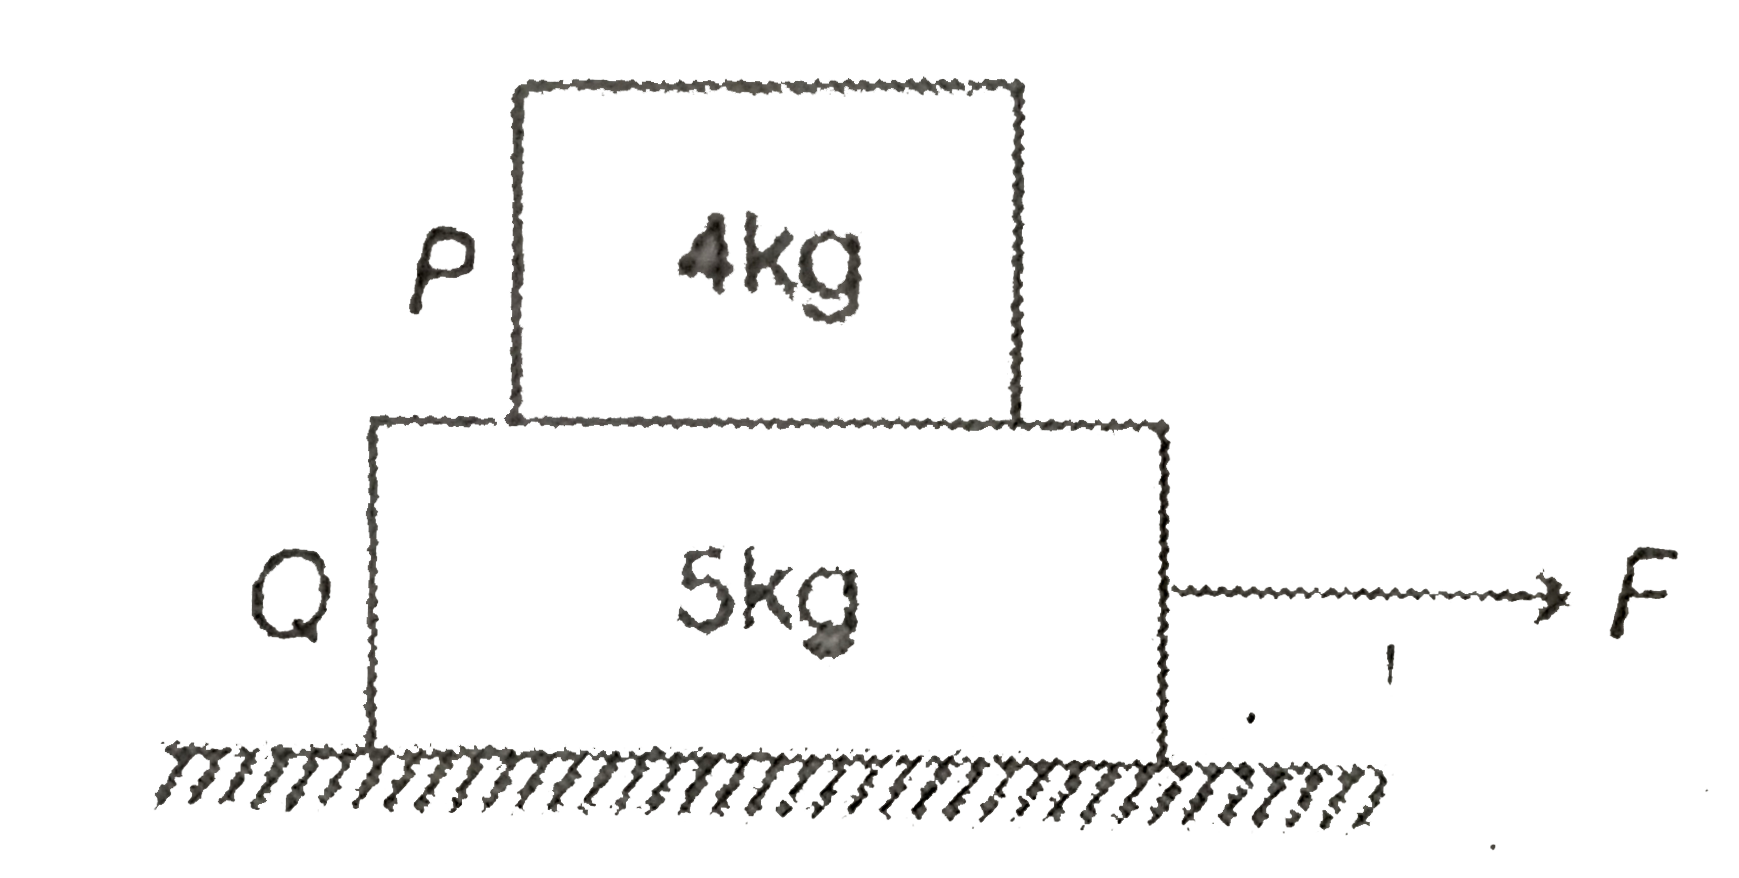 The coefficient of friction between 4 kg and 5kg blocks is 0.2 and between 5kg block and grond is 0.1 respectively Choose the correct statements.